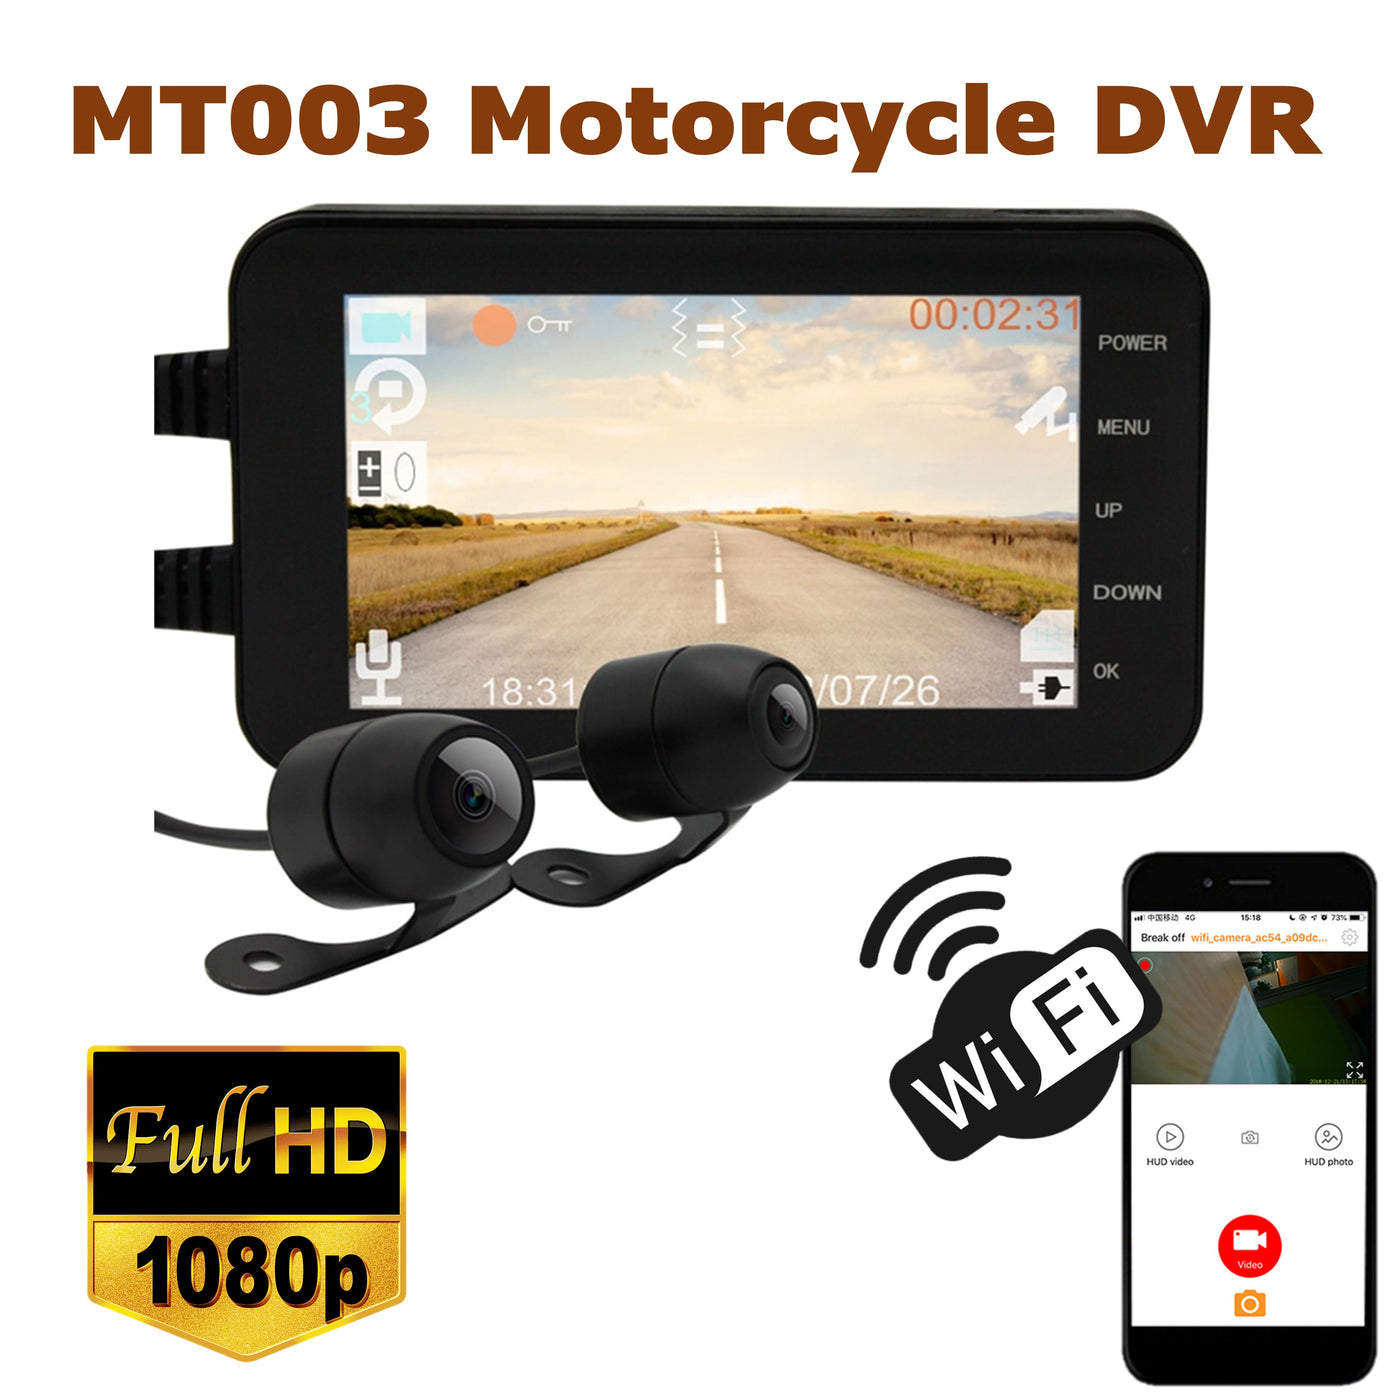 MT003 4.0 inch WIFI LCD Motorcycle DVR Camera Recorder- Black